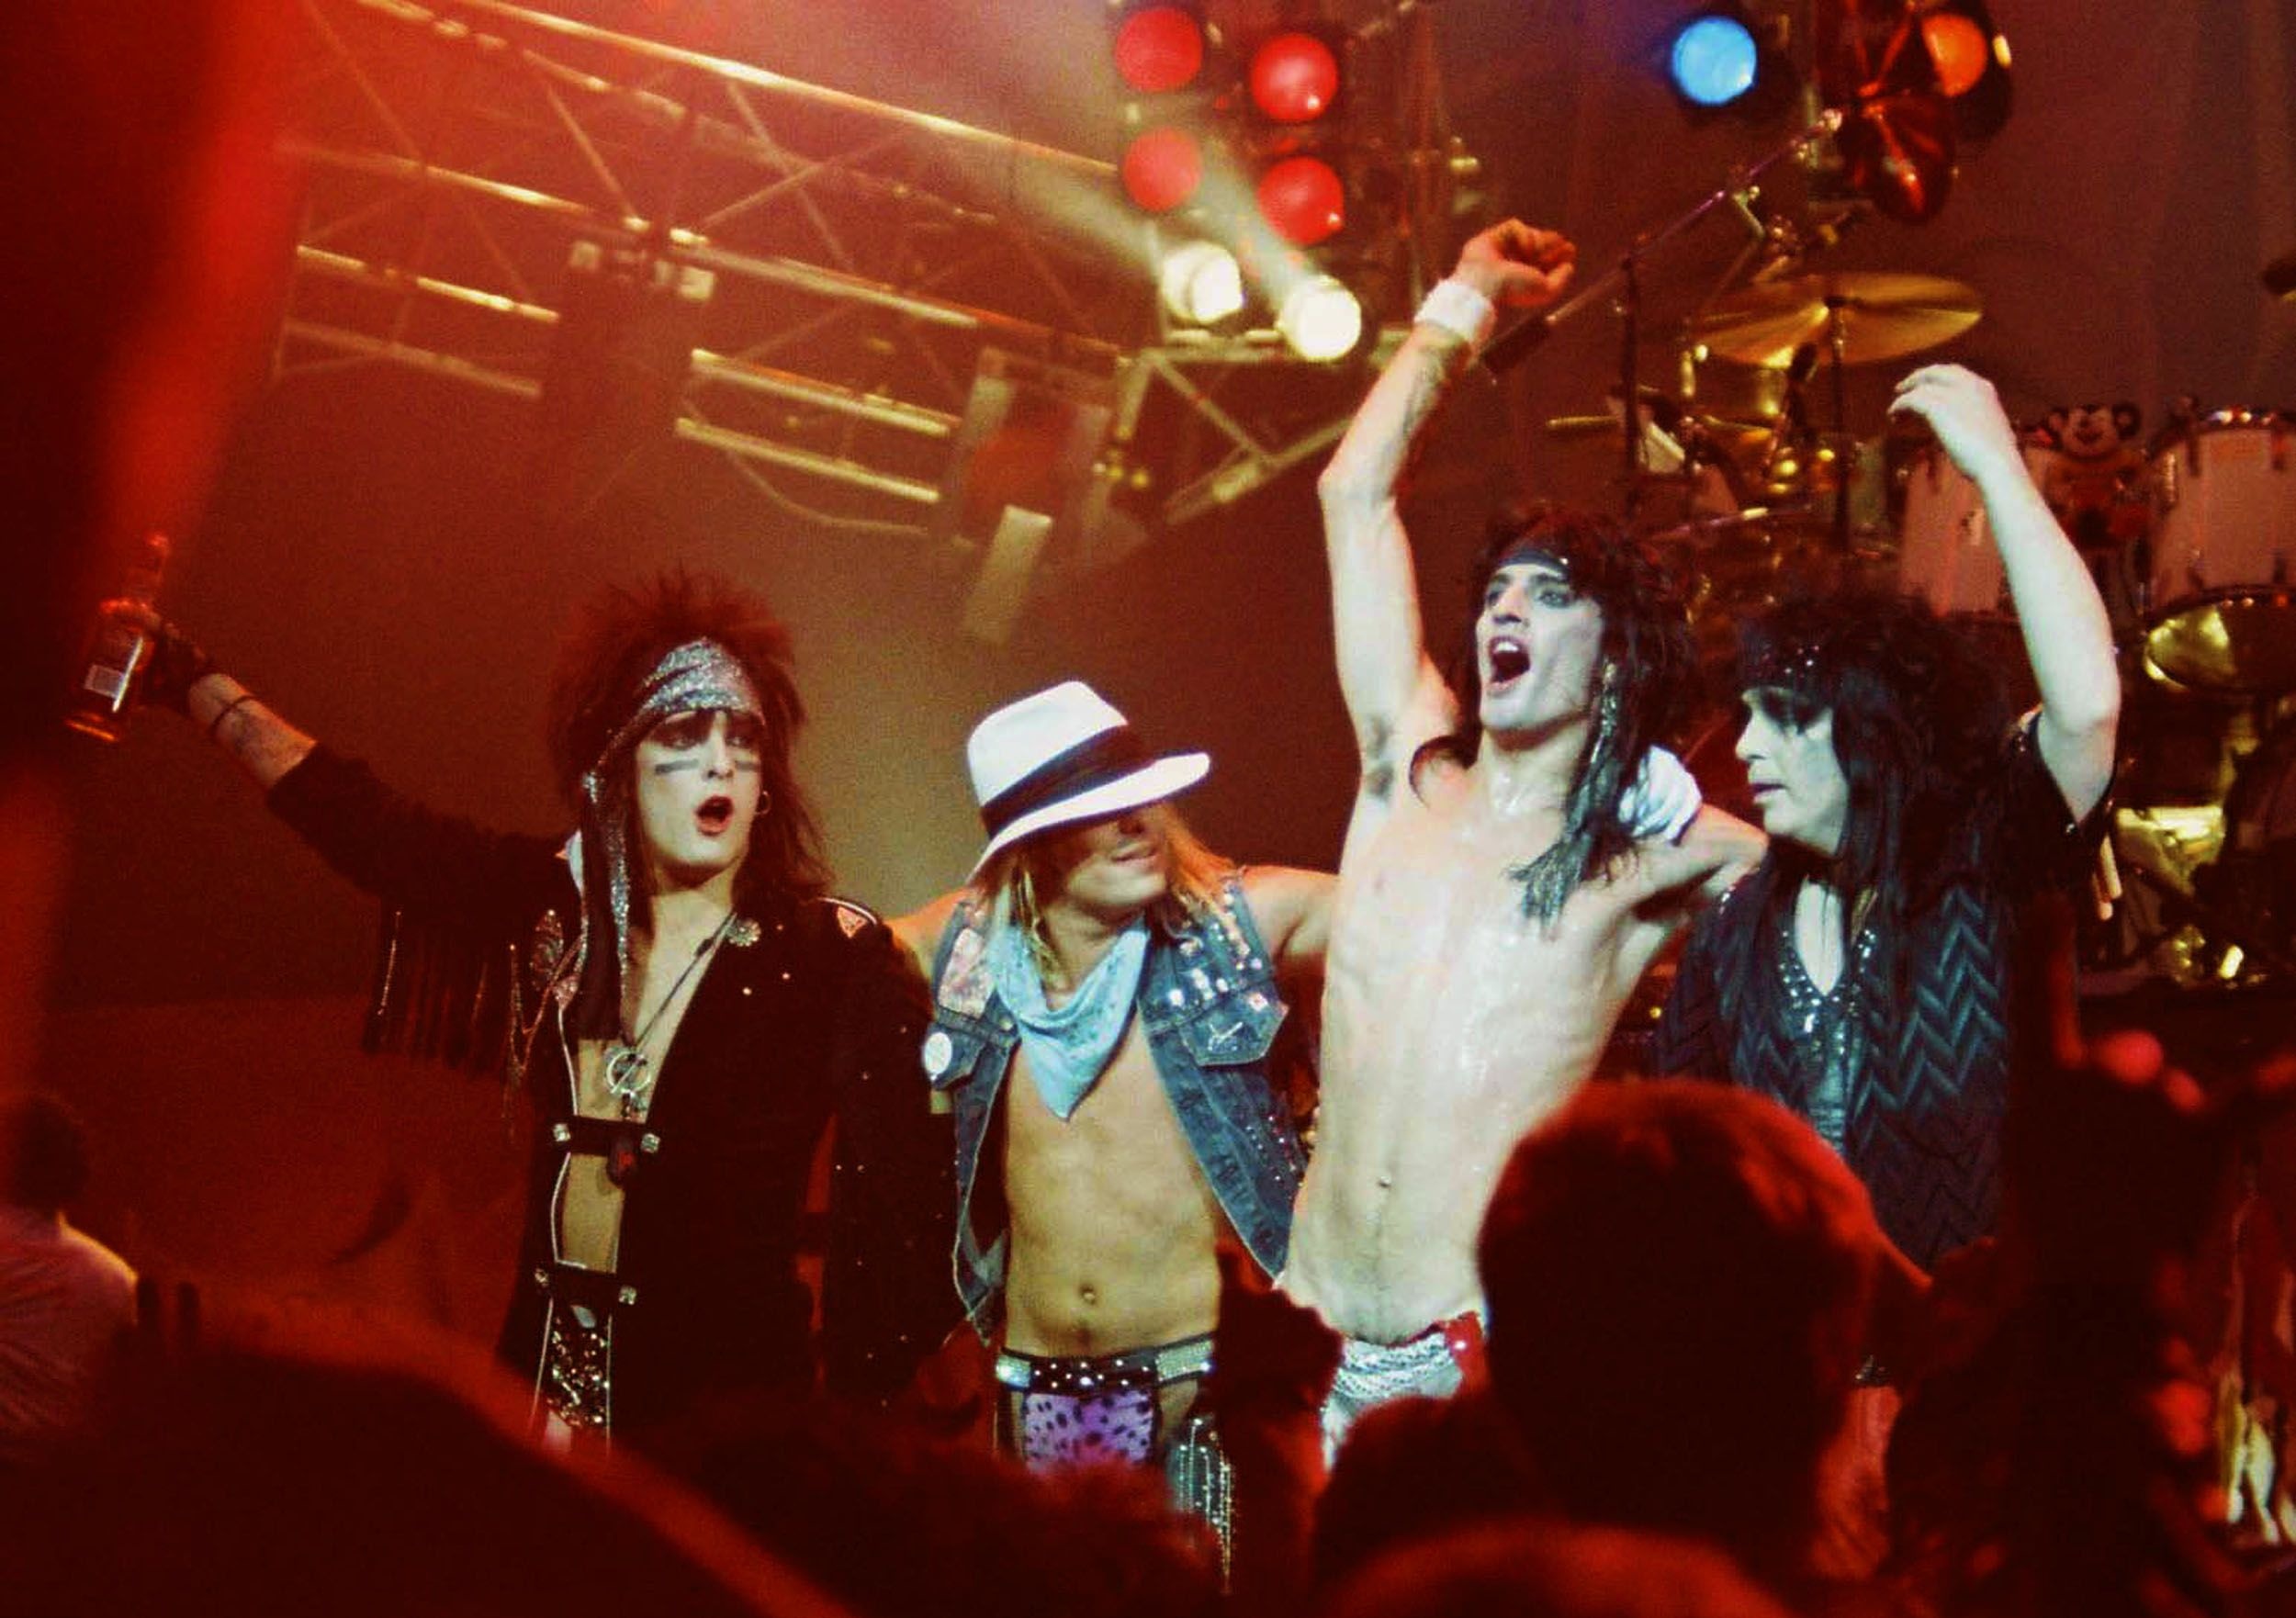 Motley Crue Photos - Pictures of Motley Crue Partying and Playing Music in the 1980s 2500x1770